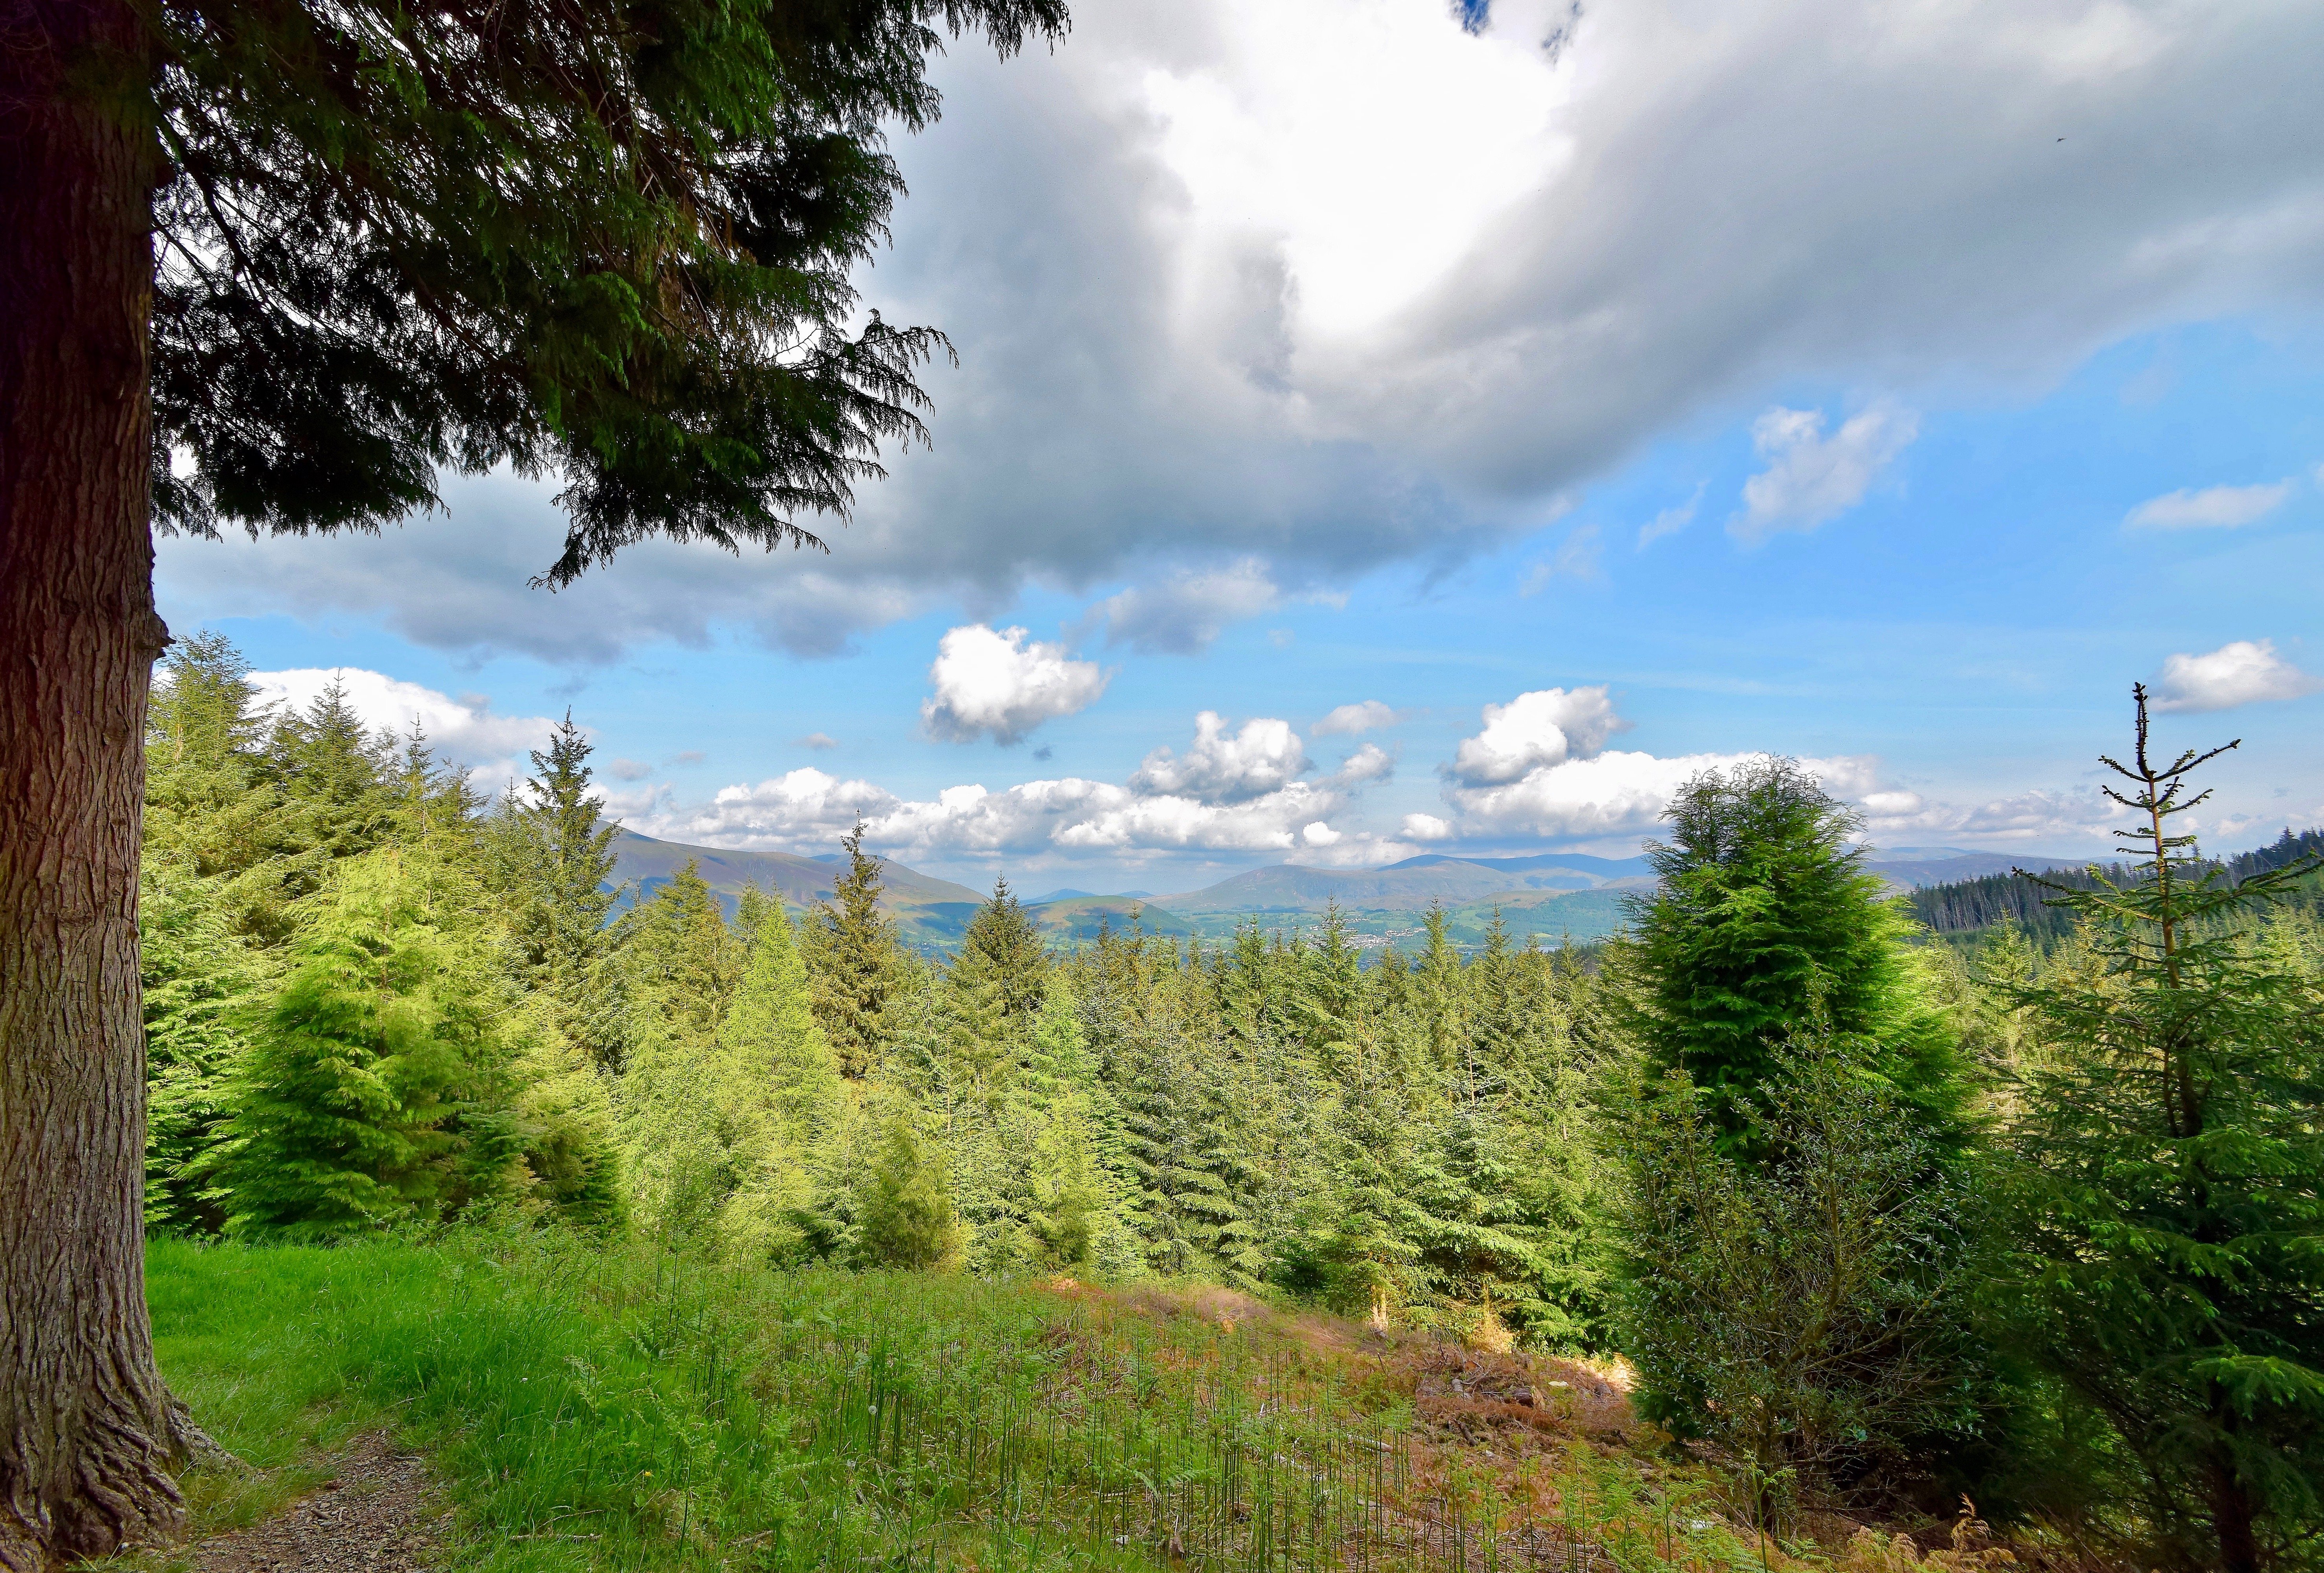 A coniferous forest in The Lake District